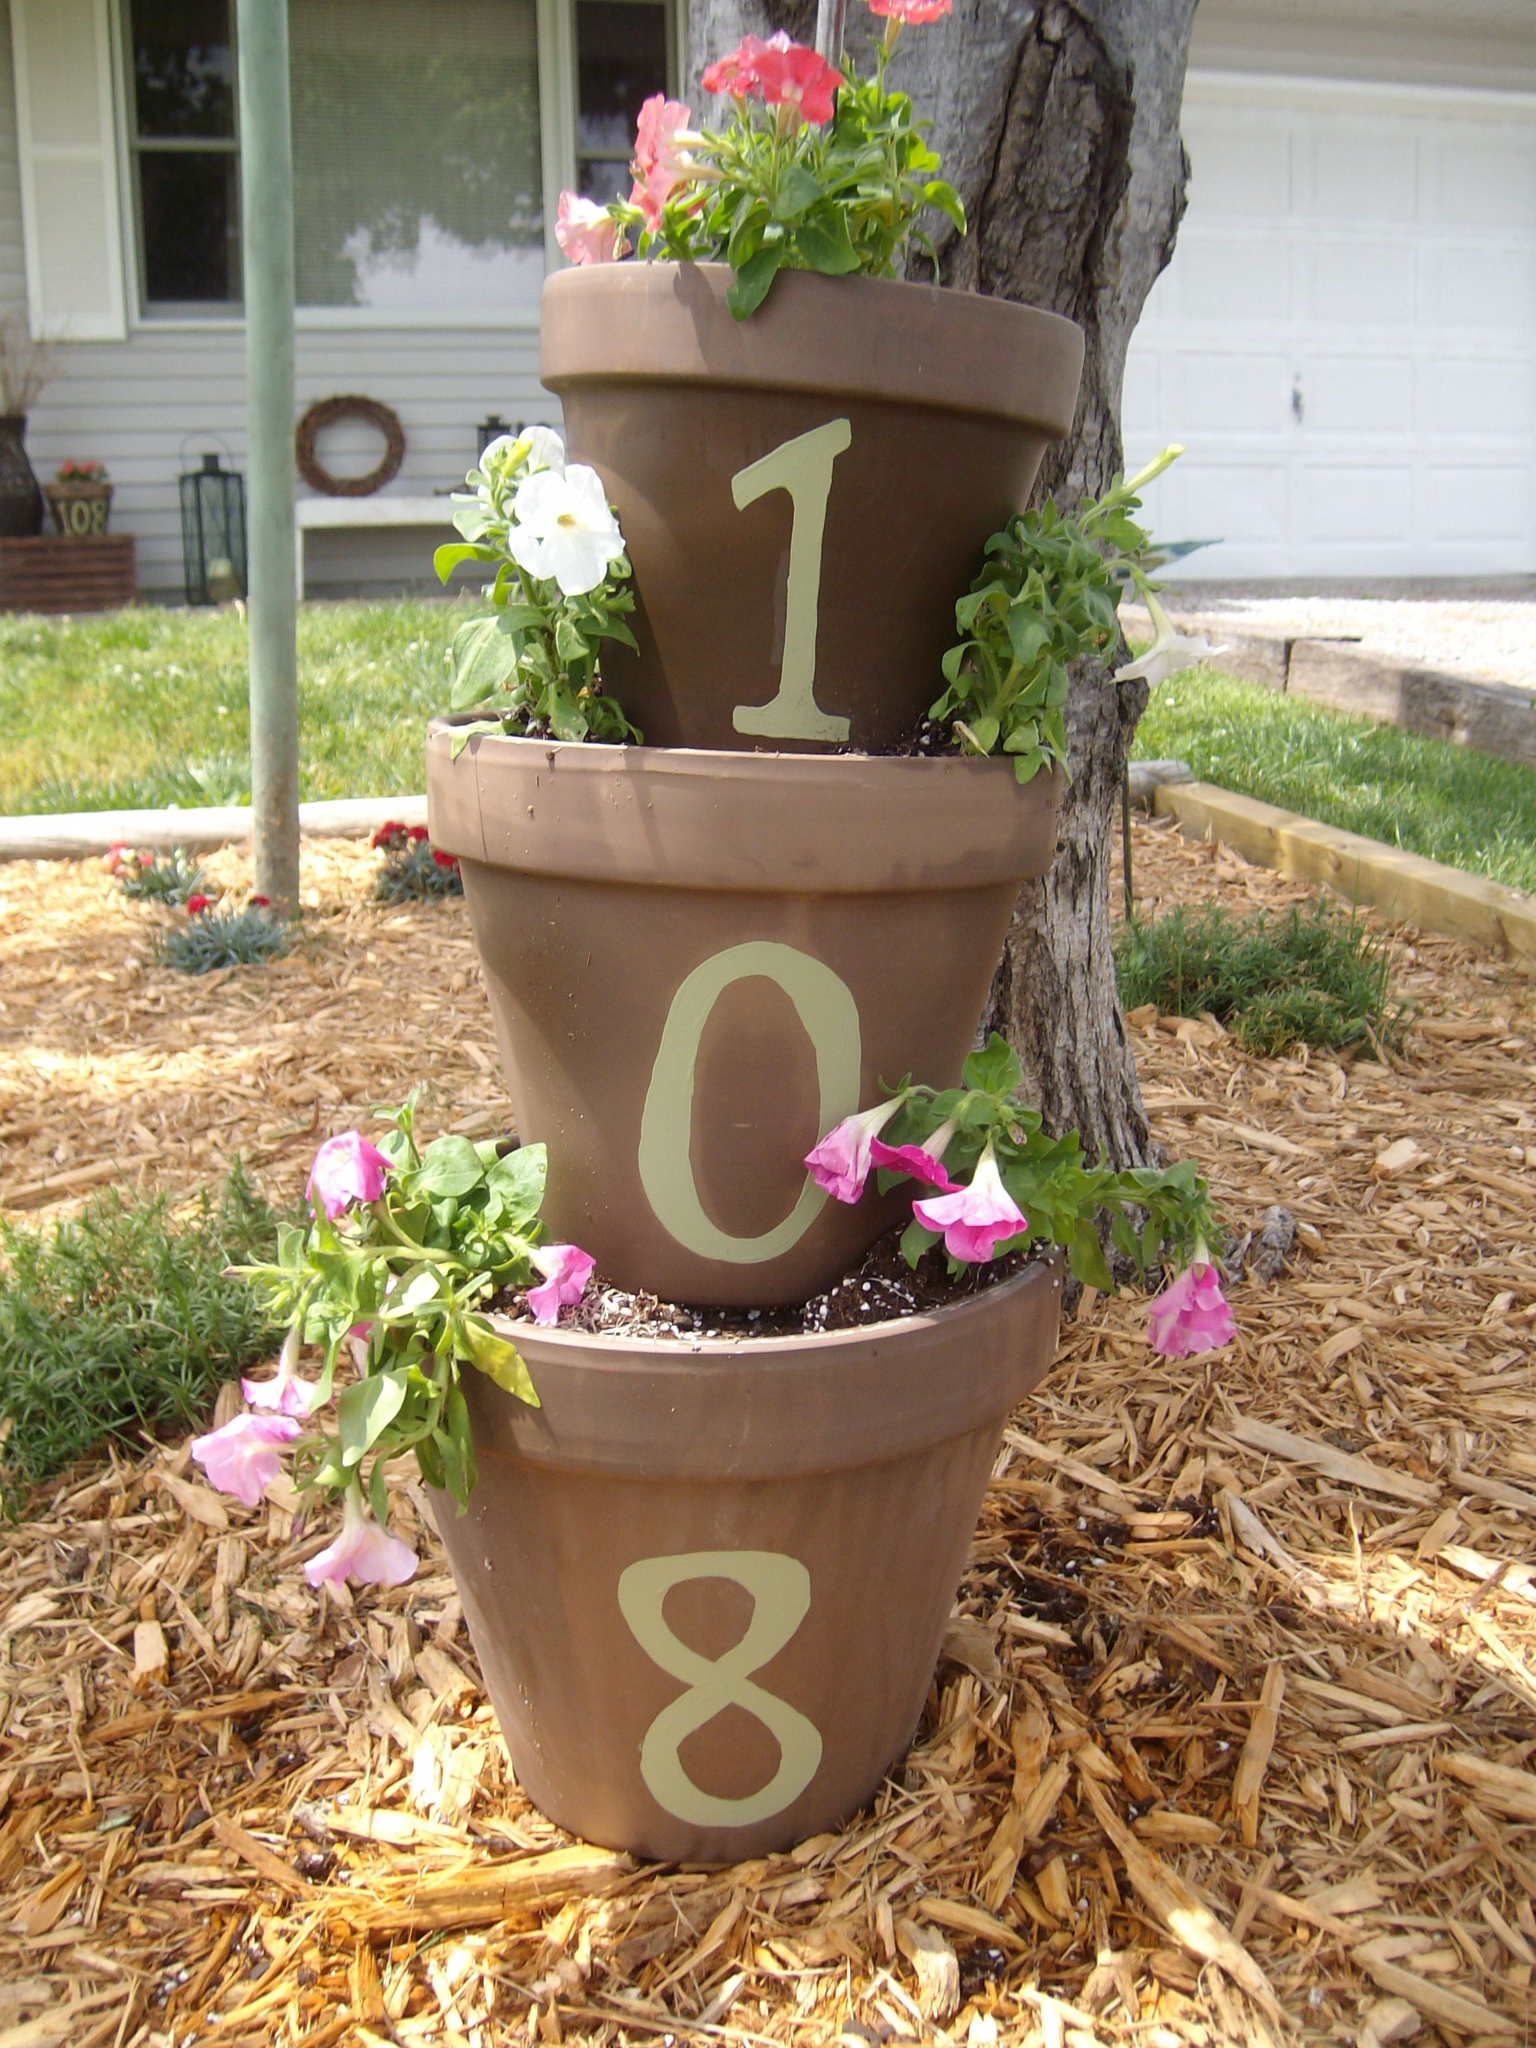 Make your house numbers stand out